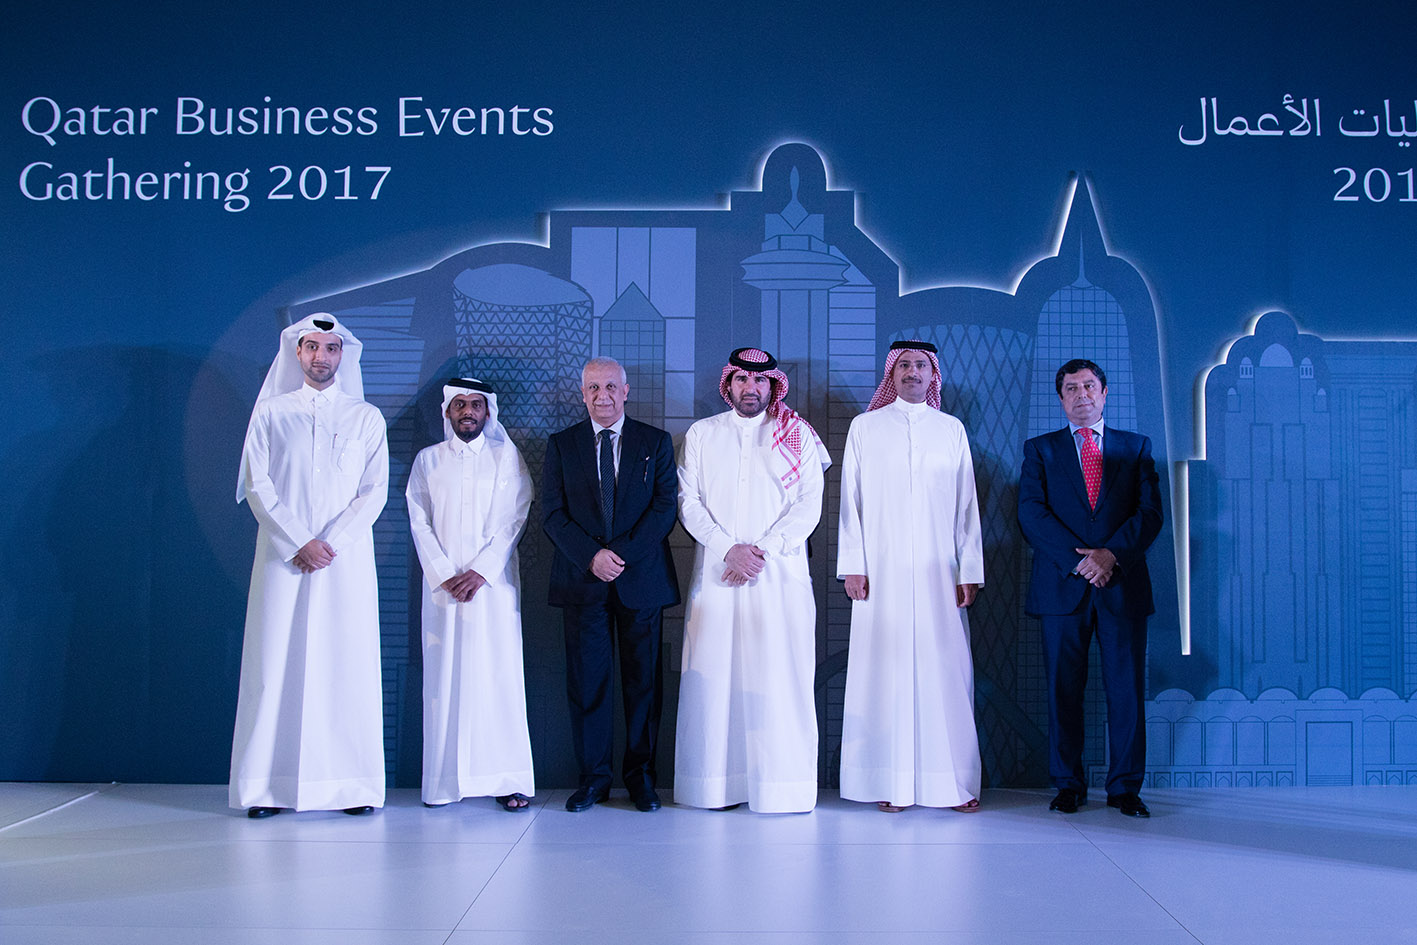 BUSINESS EVENTS GUIDE LAUNCH